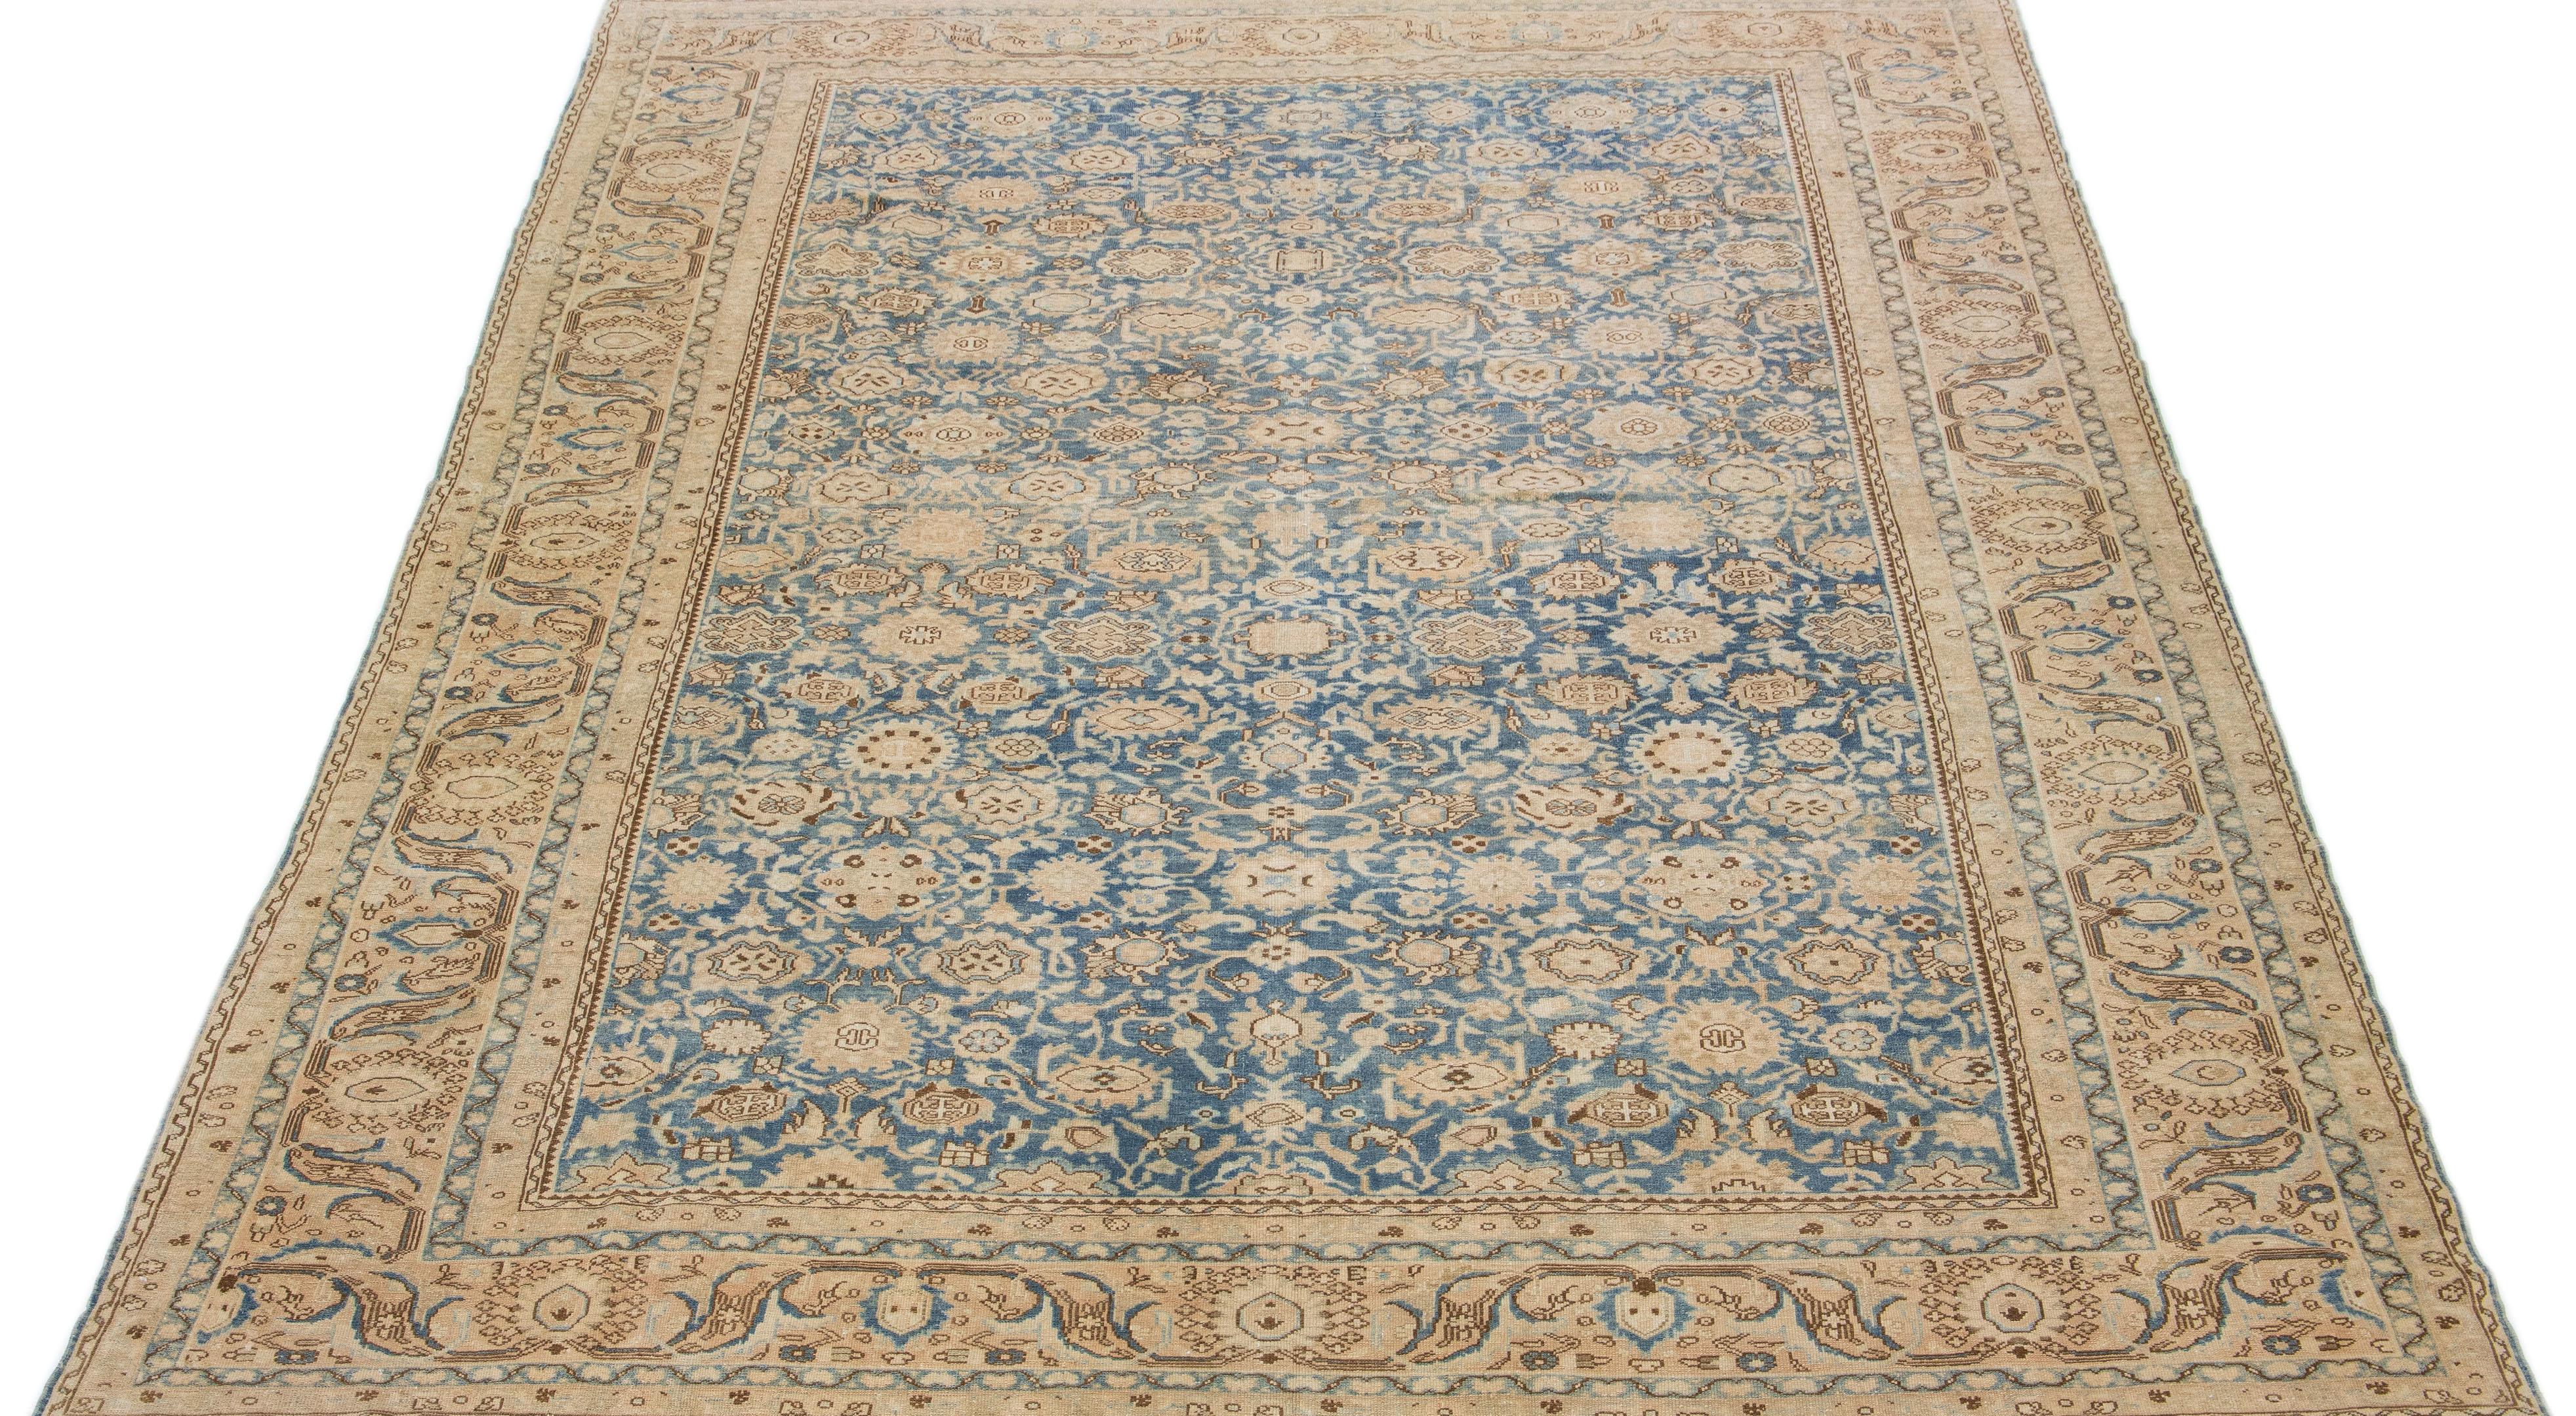 A beautiful Antique Malayer hand-knotted wool rug with a blue field. This Persian rug has beige and brown accents in an all-over rosette design.

This rug measures 10'2